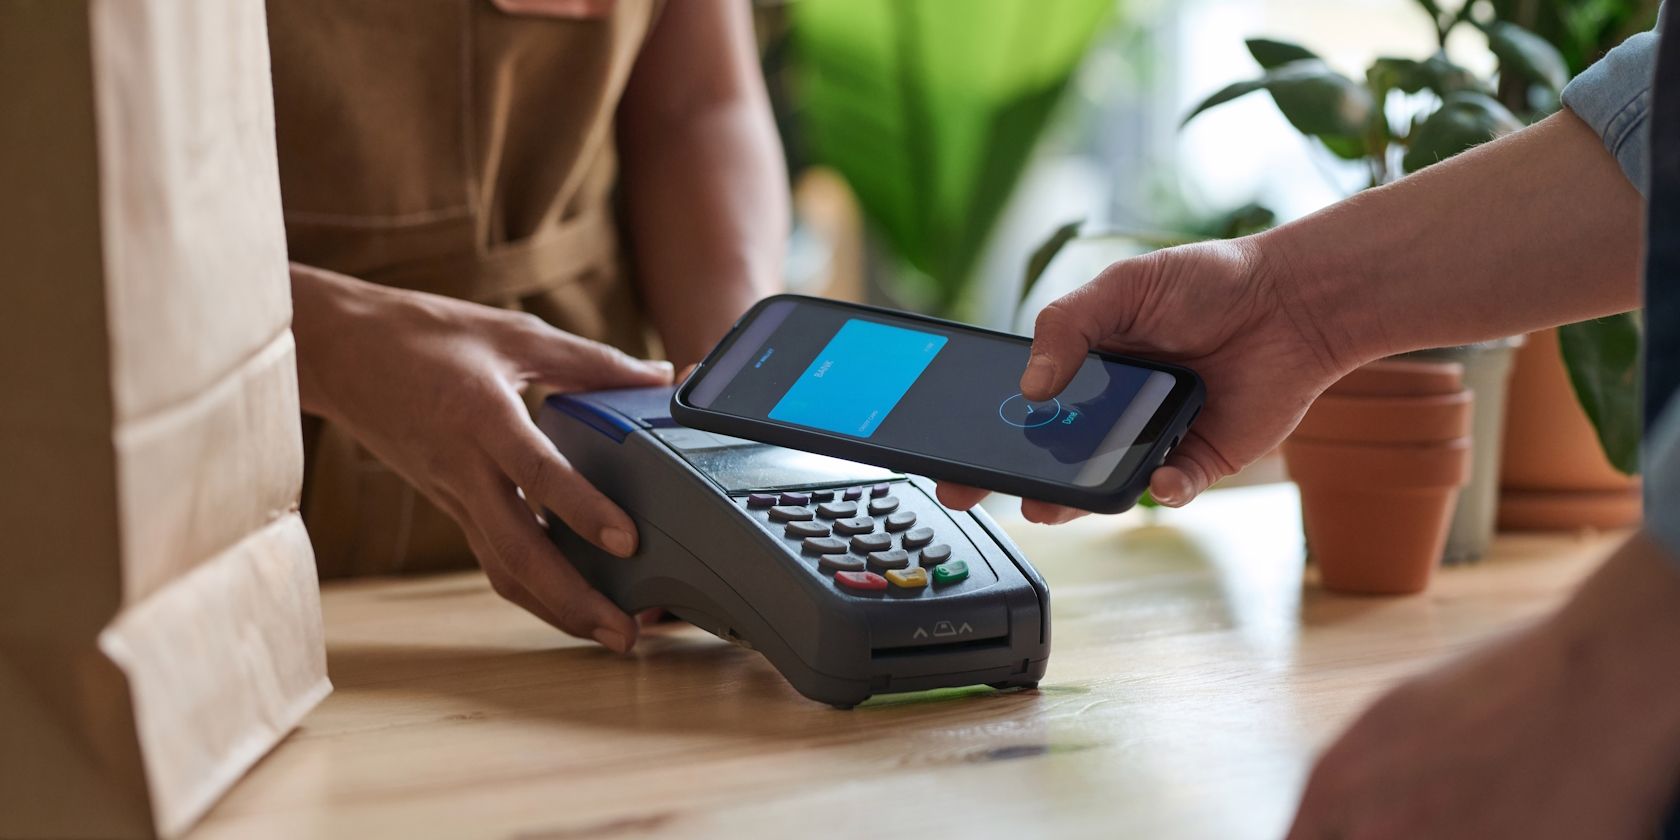 Google Pay vs. Samsung Pay: Which Payment Service Should You Use?